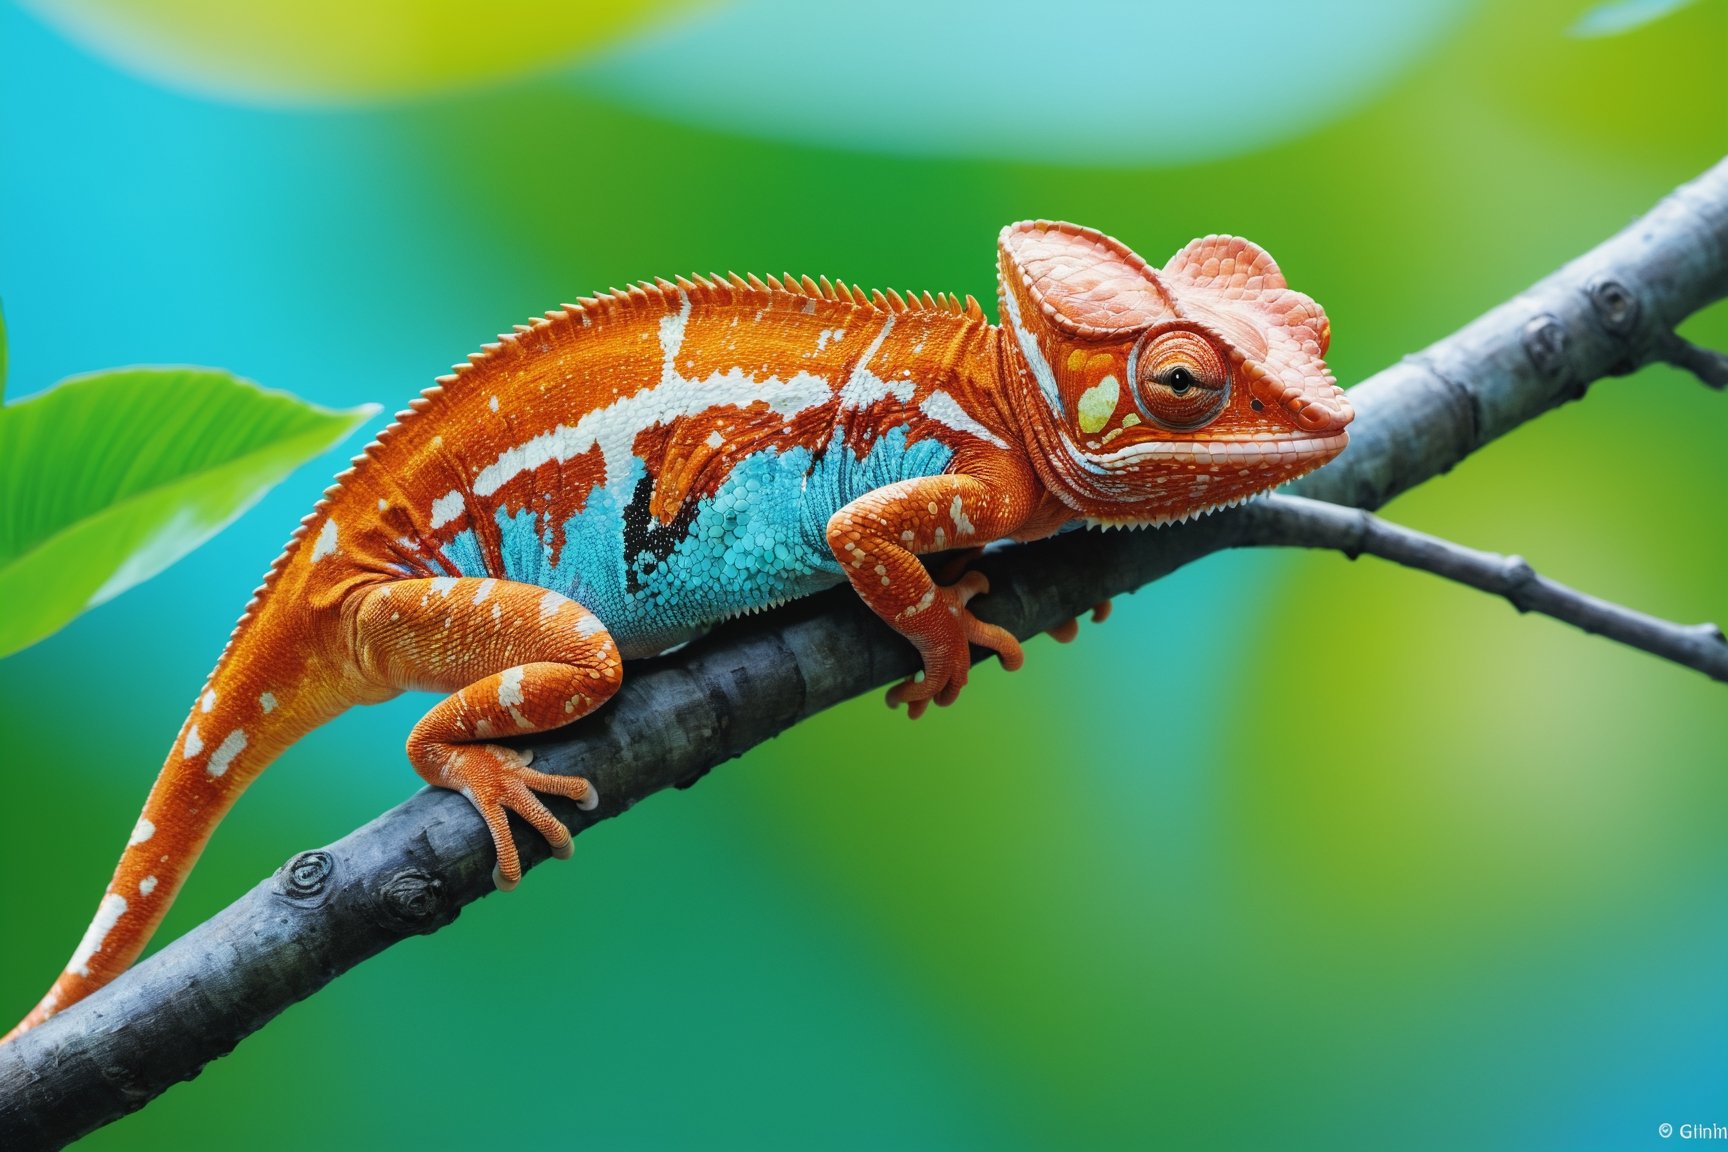 Chameleon sitting on tree branch, rainforest, , blooming flowers, fantasy, big information, bright yellow, pastel blue, pastel pink, ocean blue turquoise, bright orange, green, white dominant color palette, acrylic, photography, HD, 4k, Sharpness, Realistic, Ultra Wide, Wide Angle, Cinematic, Ambient Light, Bright Border, Edge Emphasis, Contrast, High Resolution, High Contrast, High Detail, High Texture, Surreal High Quality Model, Ultra High Quality, Golden Ratio, Pseudo Detail, pixiv fan box Trends, Acrylic Palette Knife, Studio Style Makoto Shinkai Ghibli Kenshin Impact James Gilead Gregg Rutkowski Chiho Aoshima, Watercolor, ArtStation Trends, Sharp Focus, Studio Photography, Intricate Details, Highly Detailed, Author: ChiliKiri, Mysterious